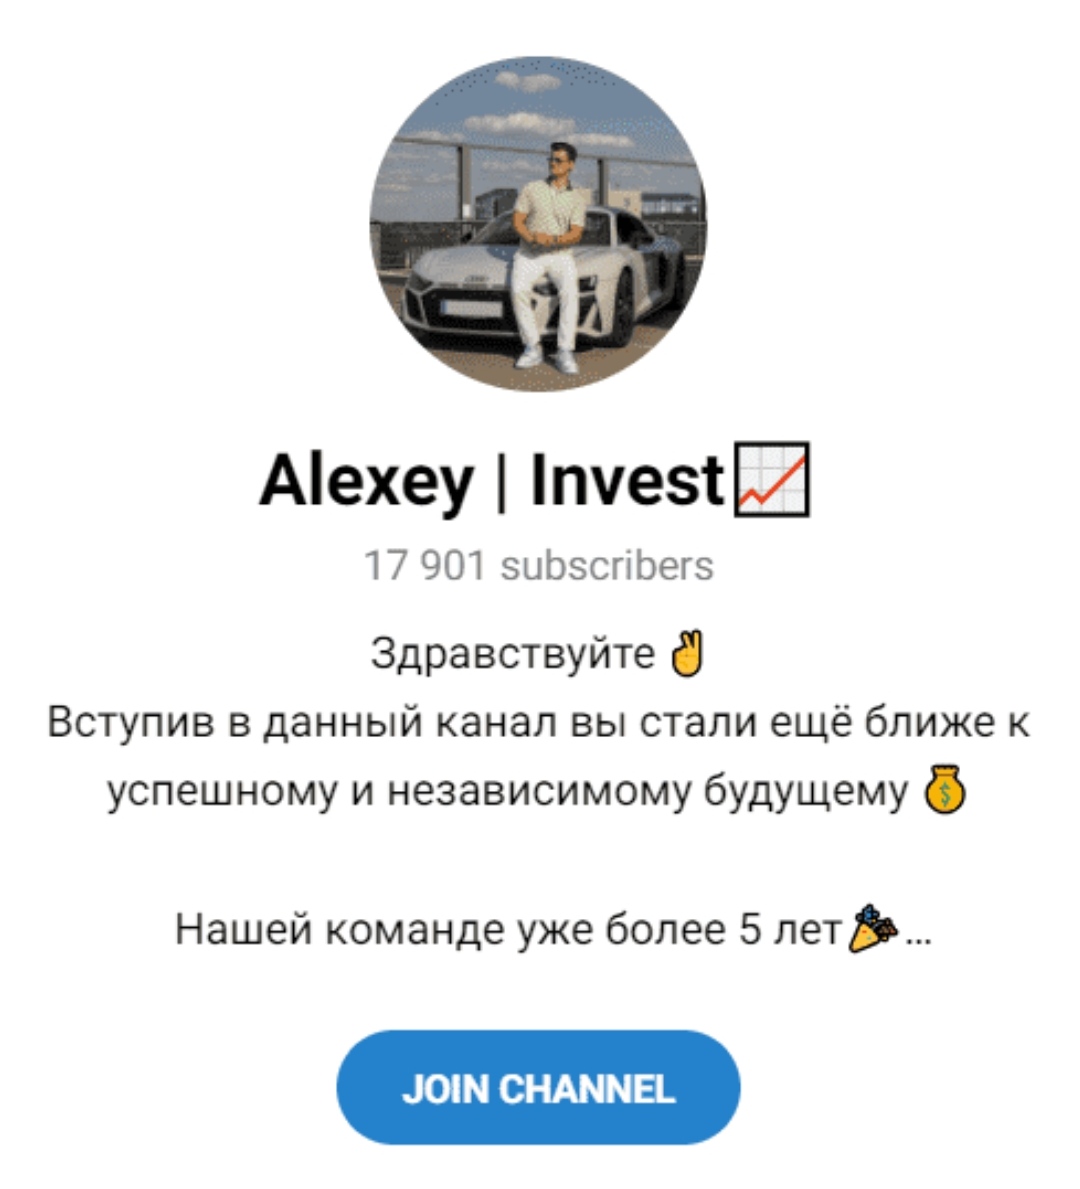 Alexey Invest Official - Телеграм